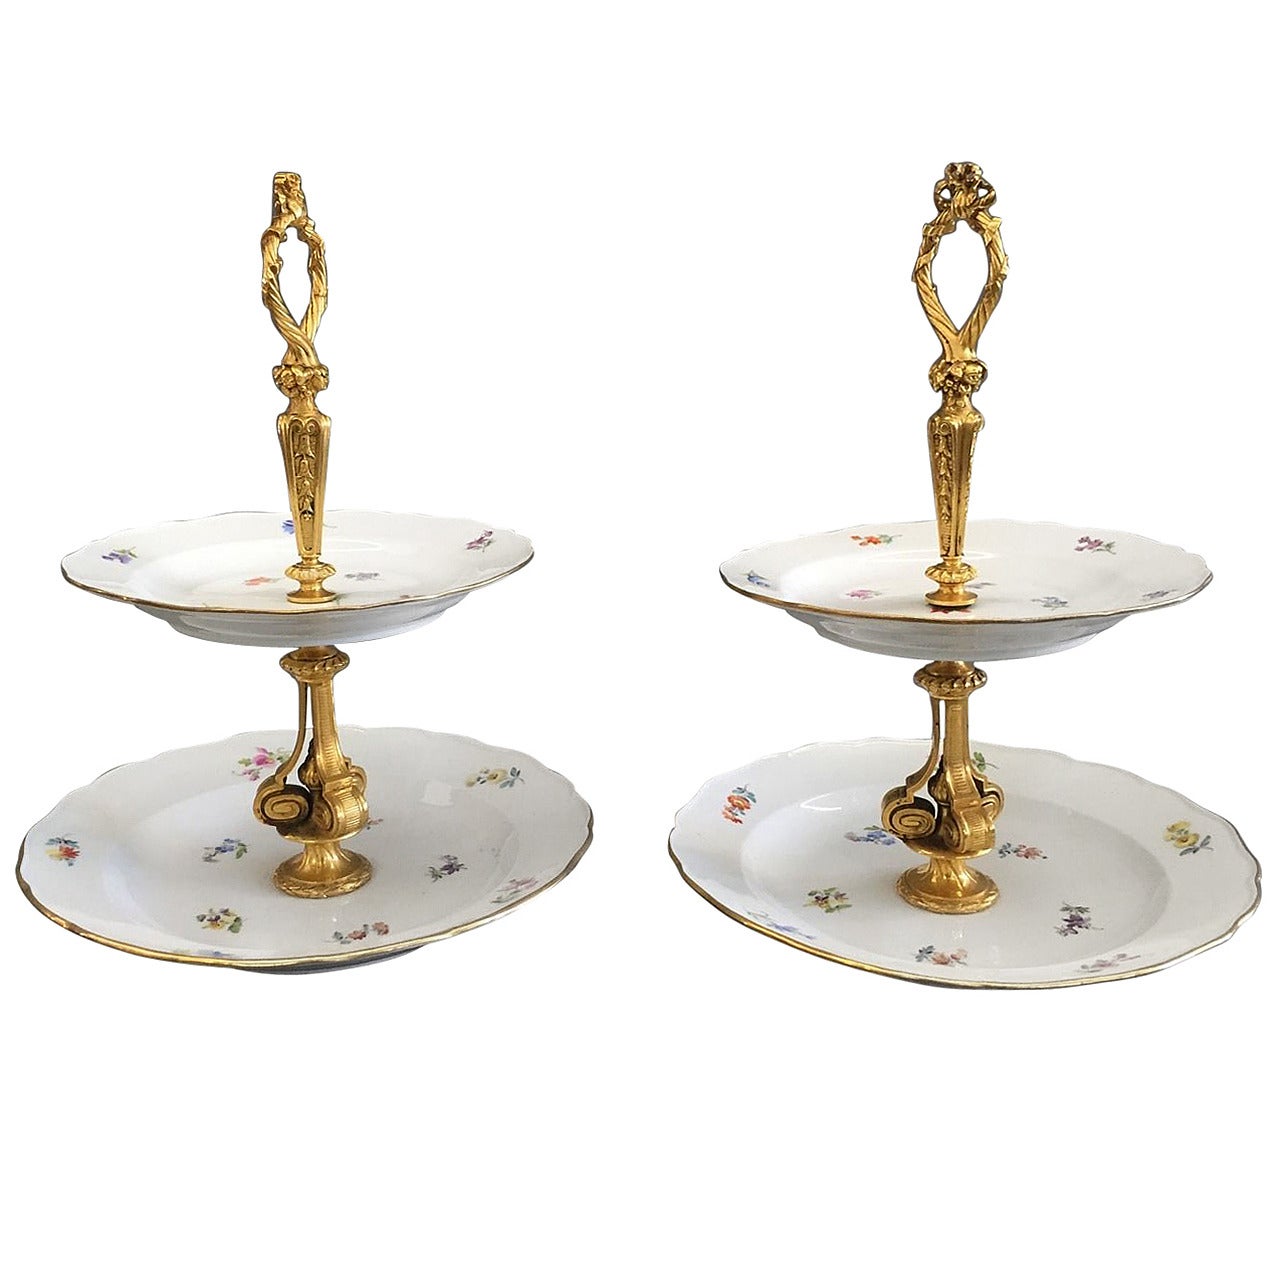 Pair of 19th Century Meissen Porcelain Two-Tier Dessert Dishes with Gilt Bronze